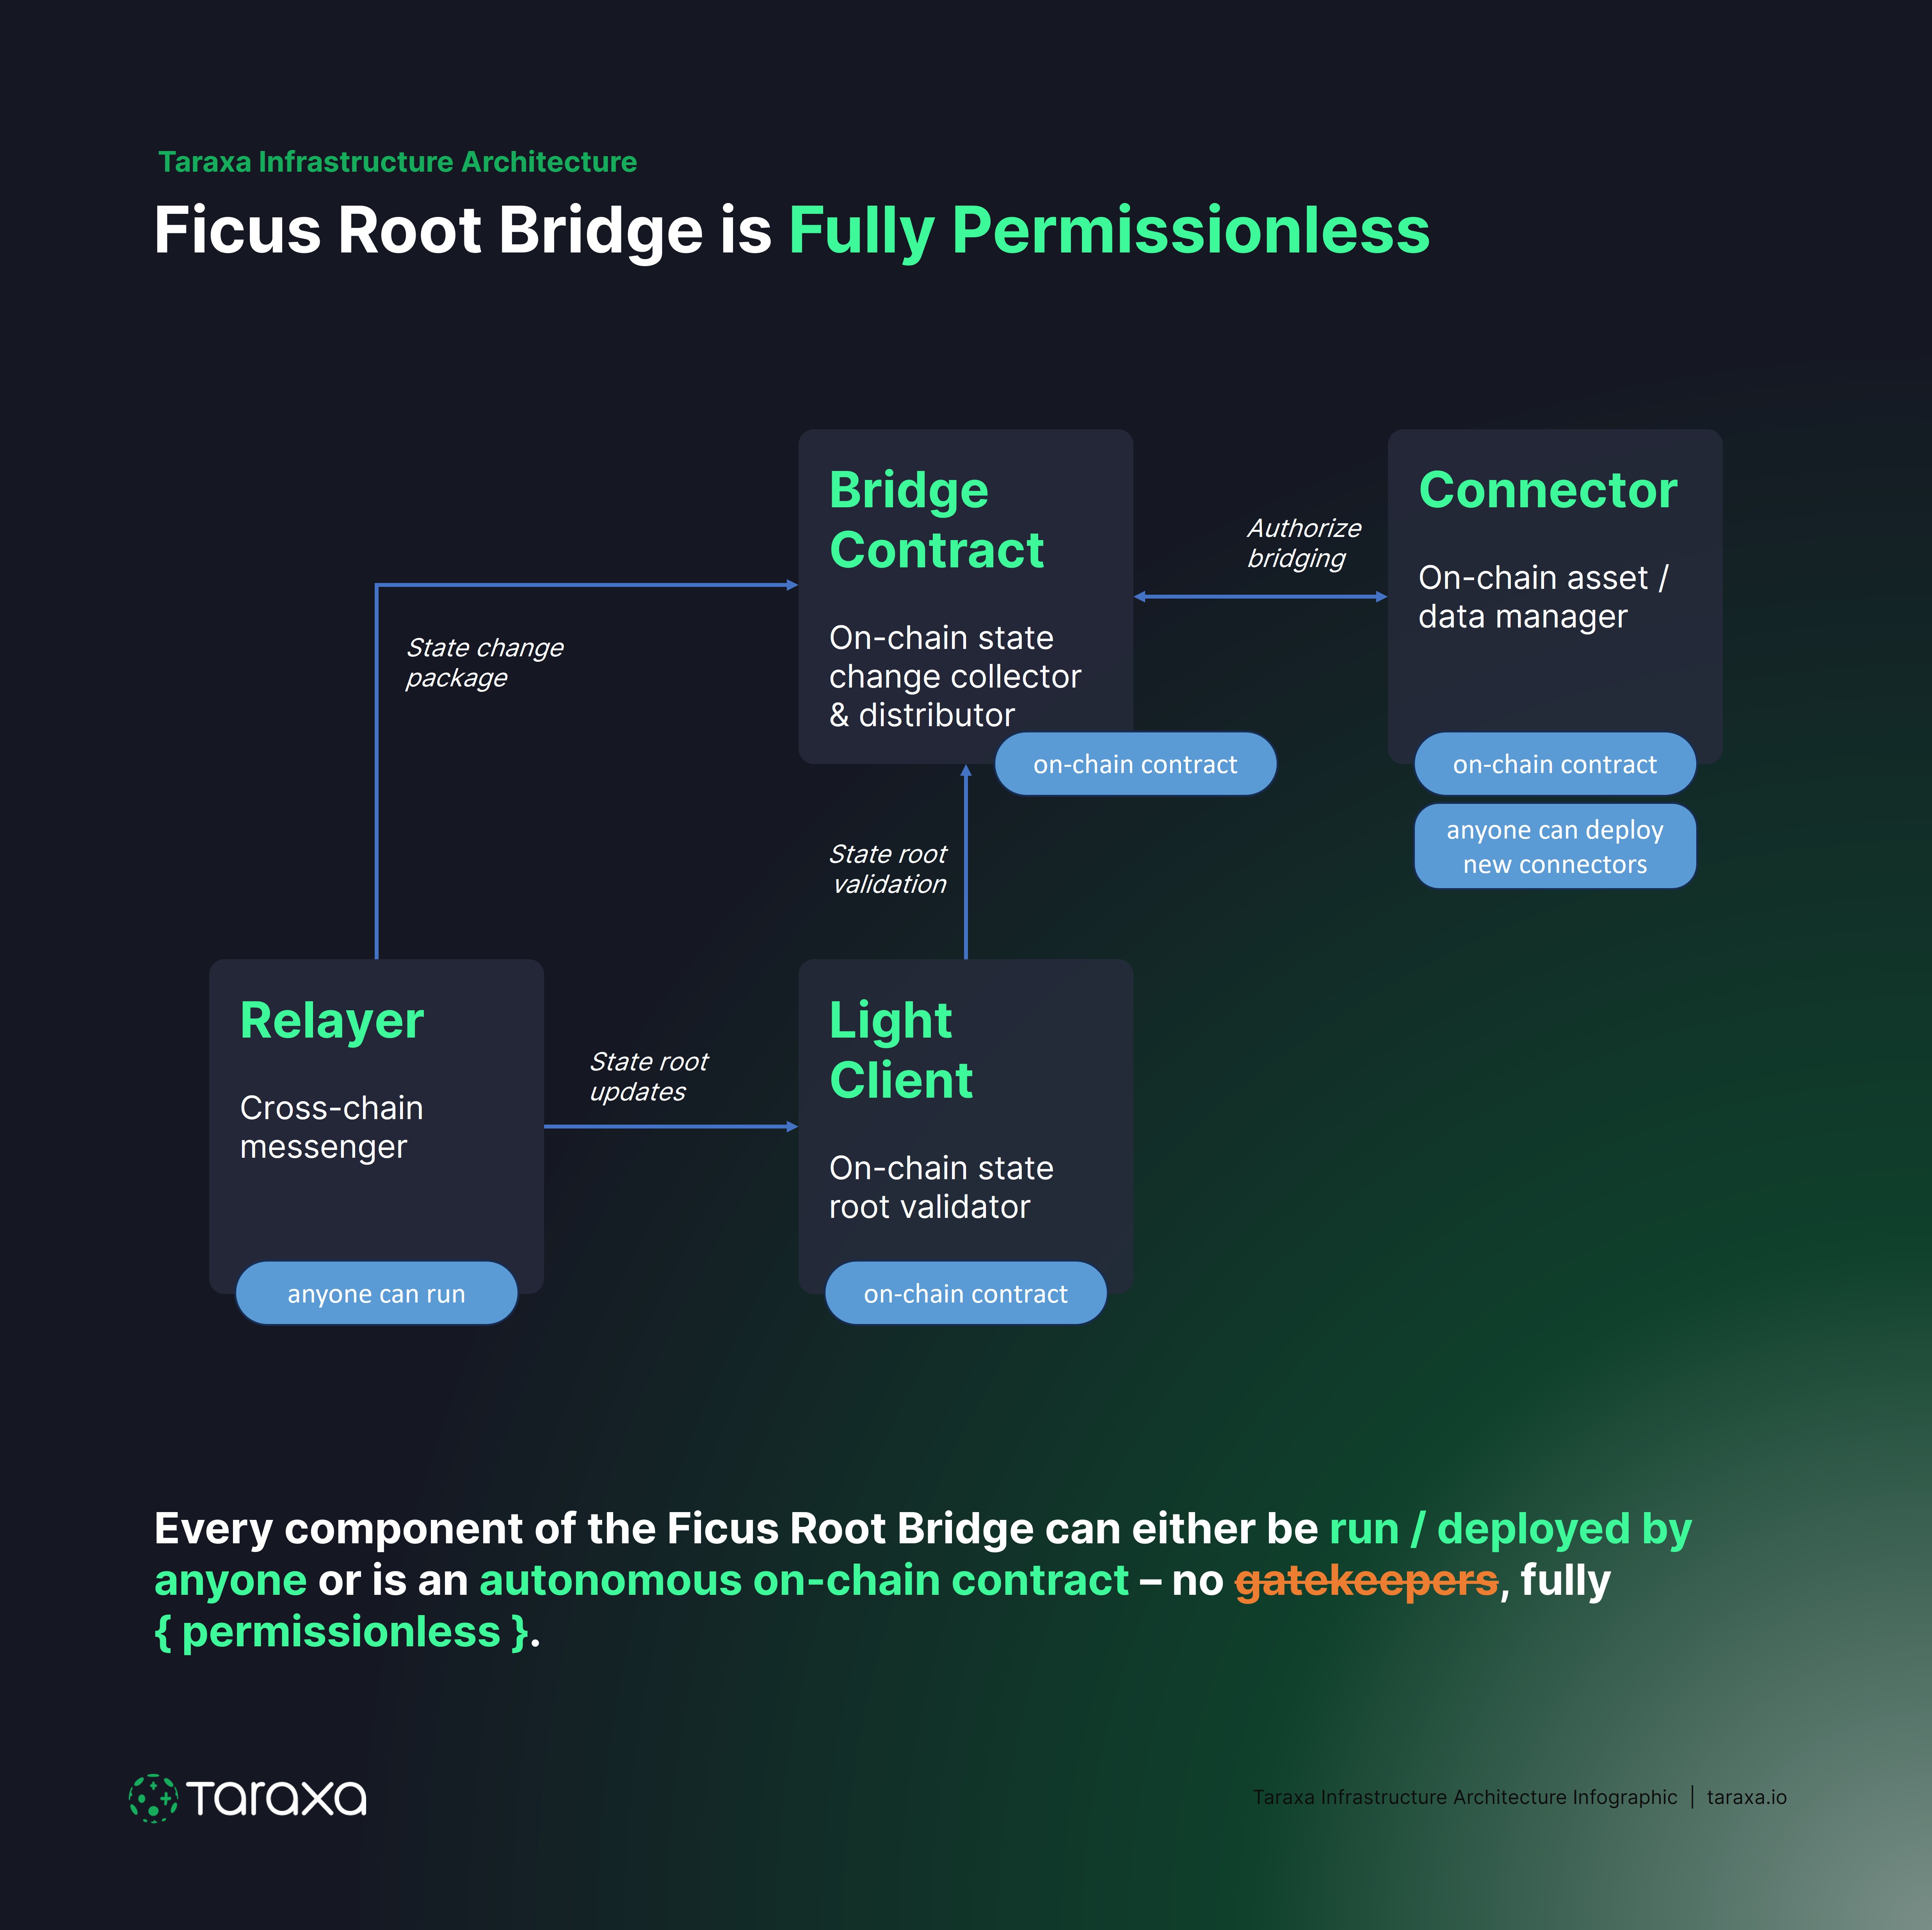 Every component of the Ficus Root Bridge is Fully Permissionless